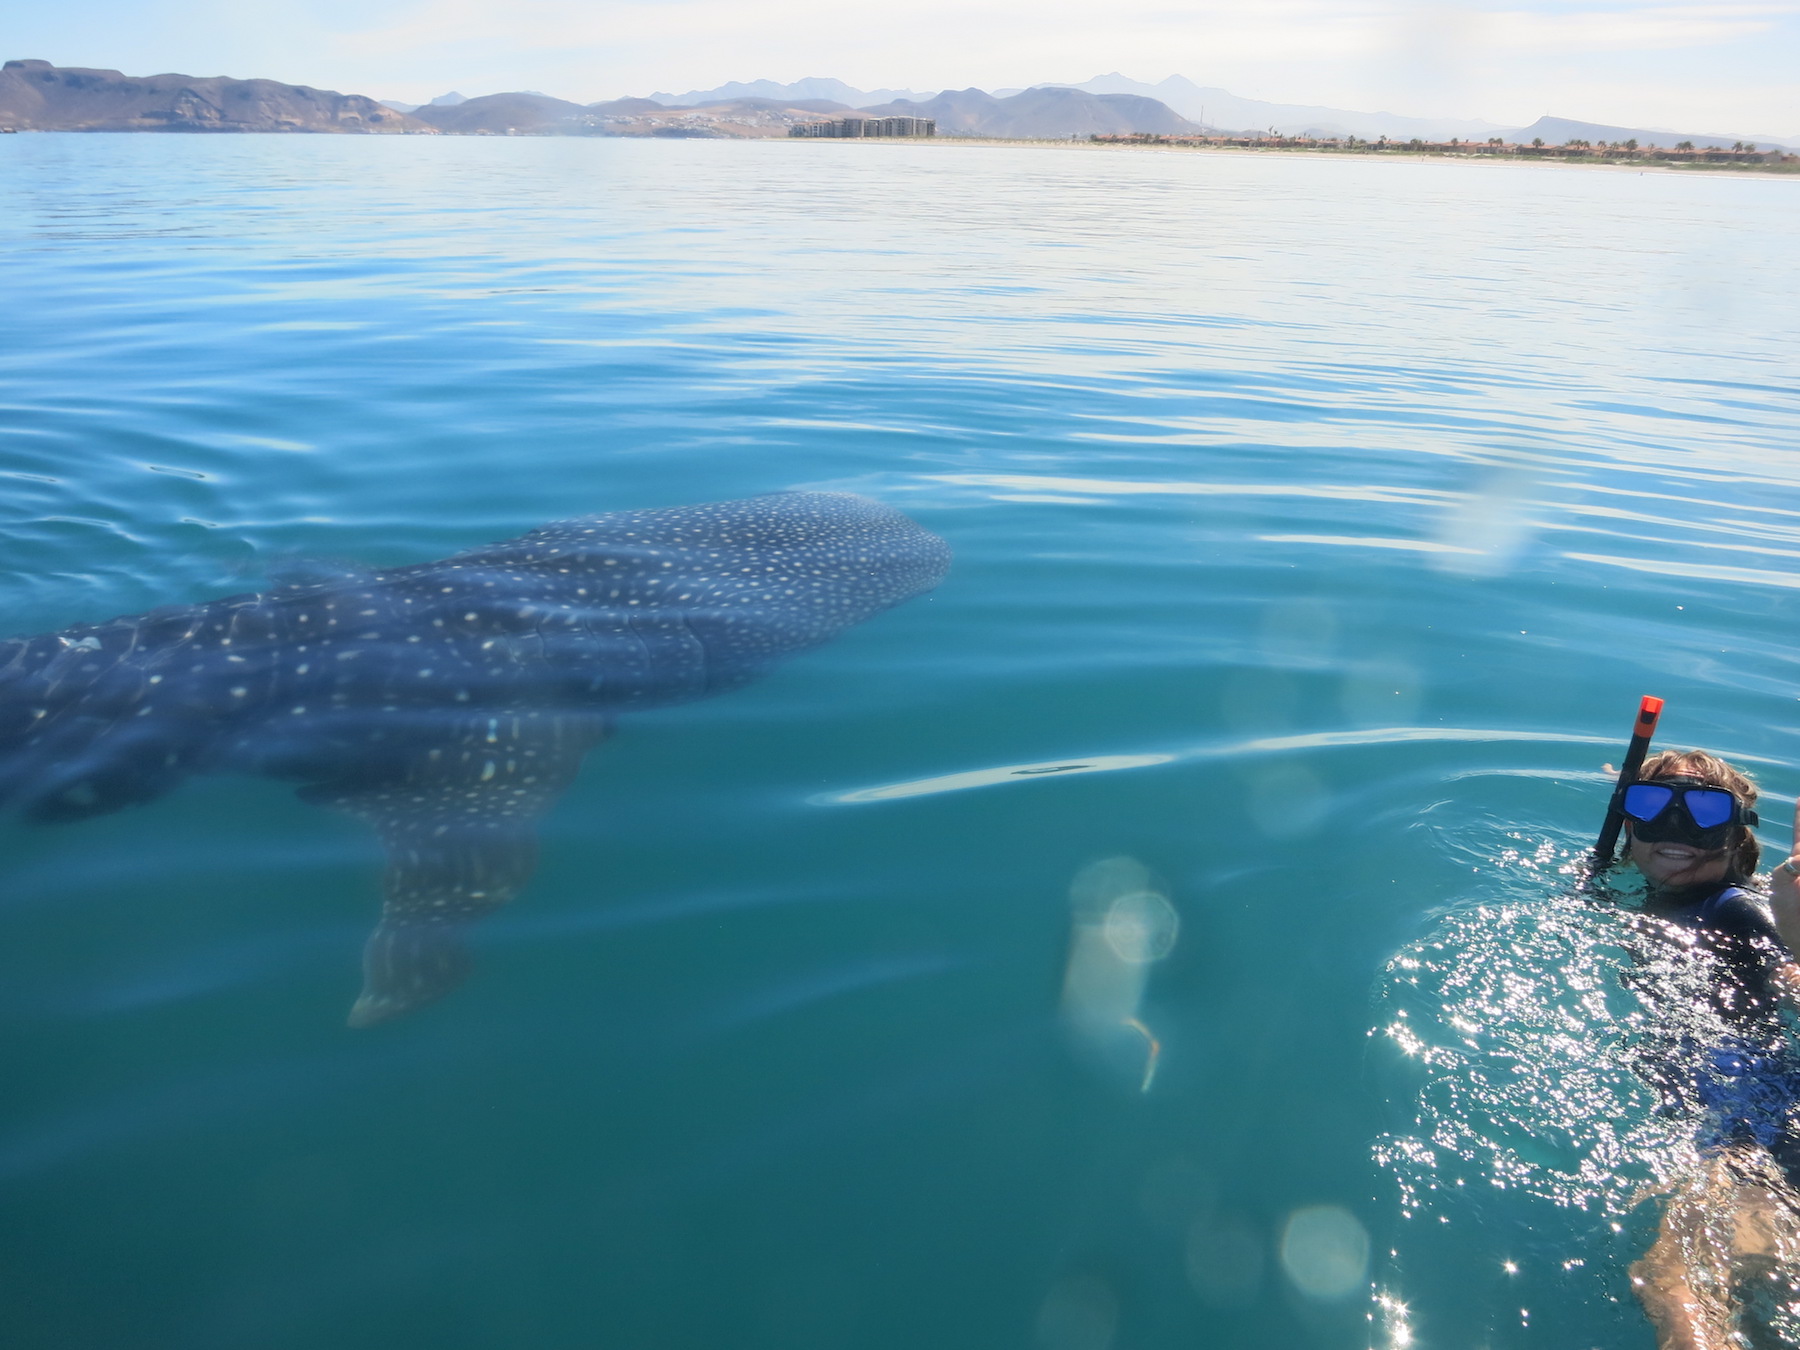 Day 6: Whale Shark Research - snorkel with these incredible giant fish